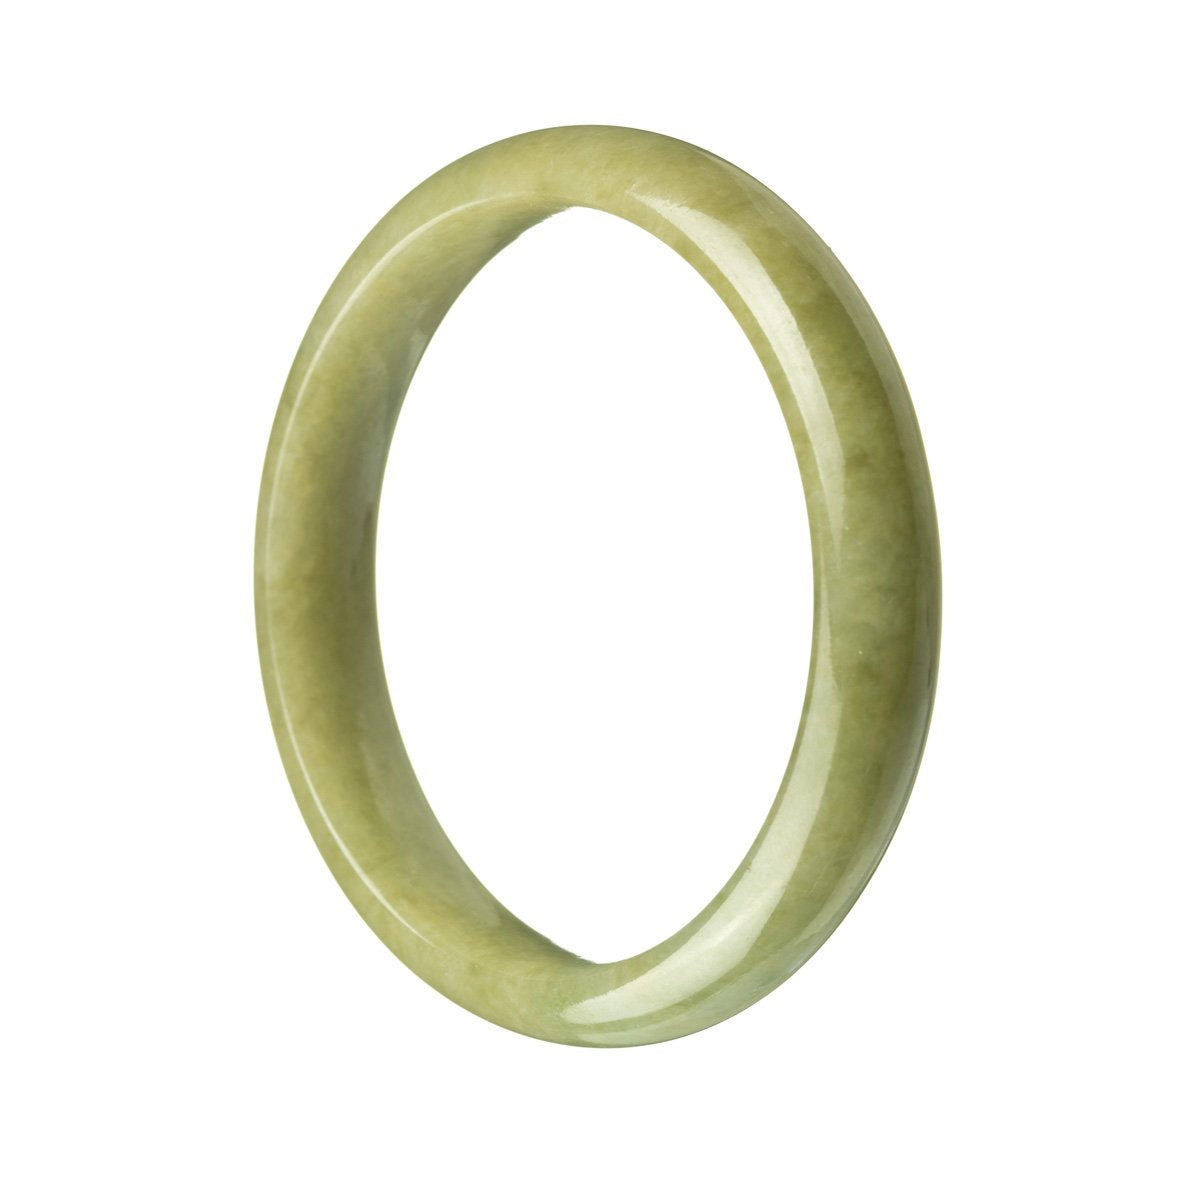 A close-up photo of a beautiful, semi-round jade bangle in a vibrant shade of green. The bangle is made from genuine Grade A Green Burma Jade and measures 58mm in diameter. It features a smooth, polished surface, showcasing the natural patterns and translucency of the jade. The bangle is a timeless piece of jewelry from the MAYS™ collection.